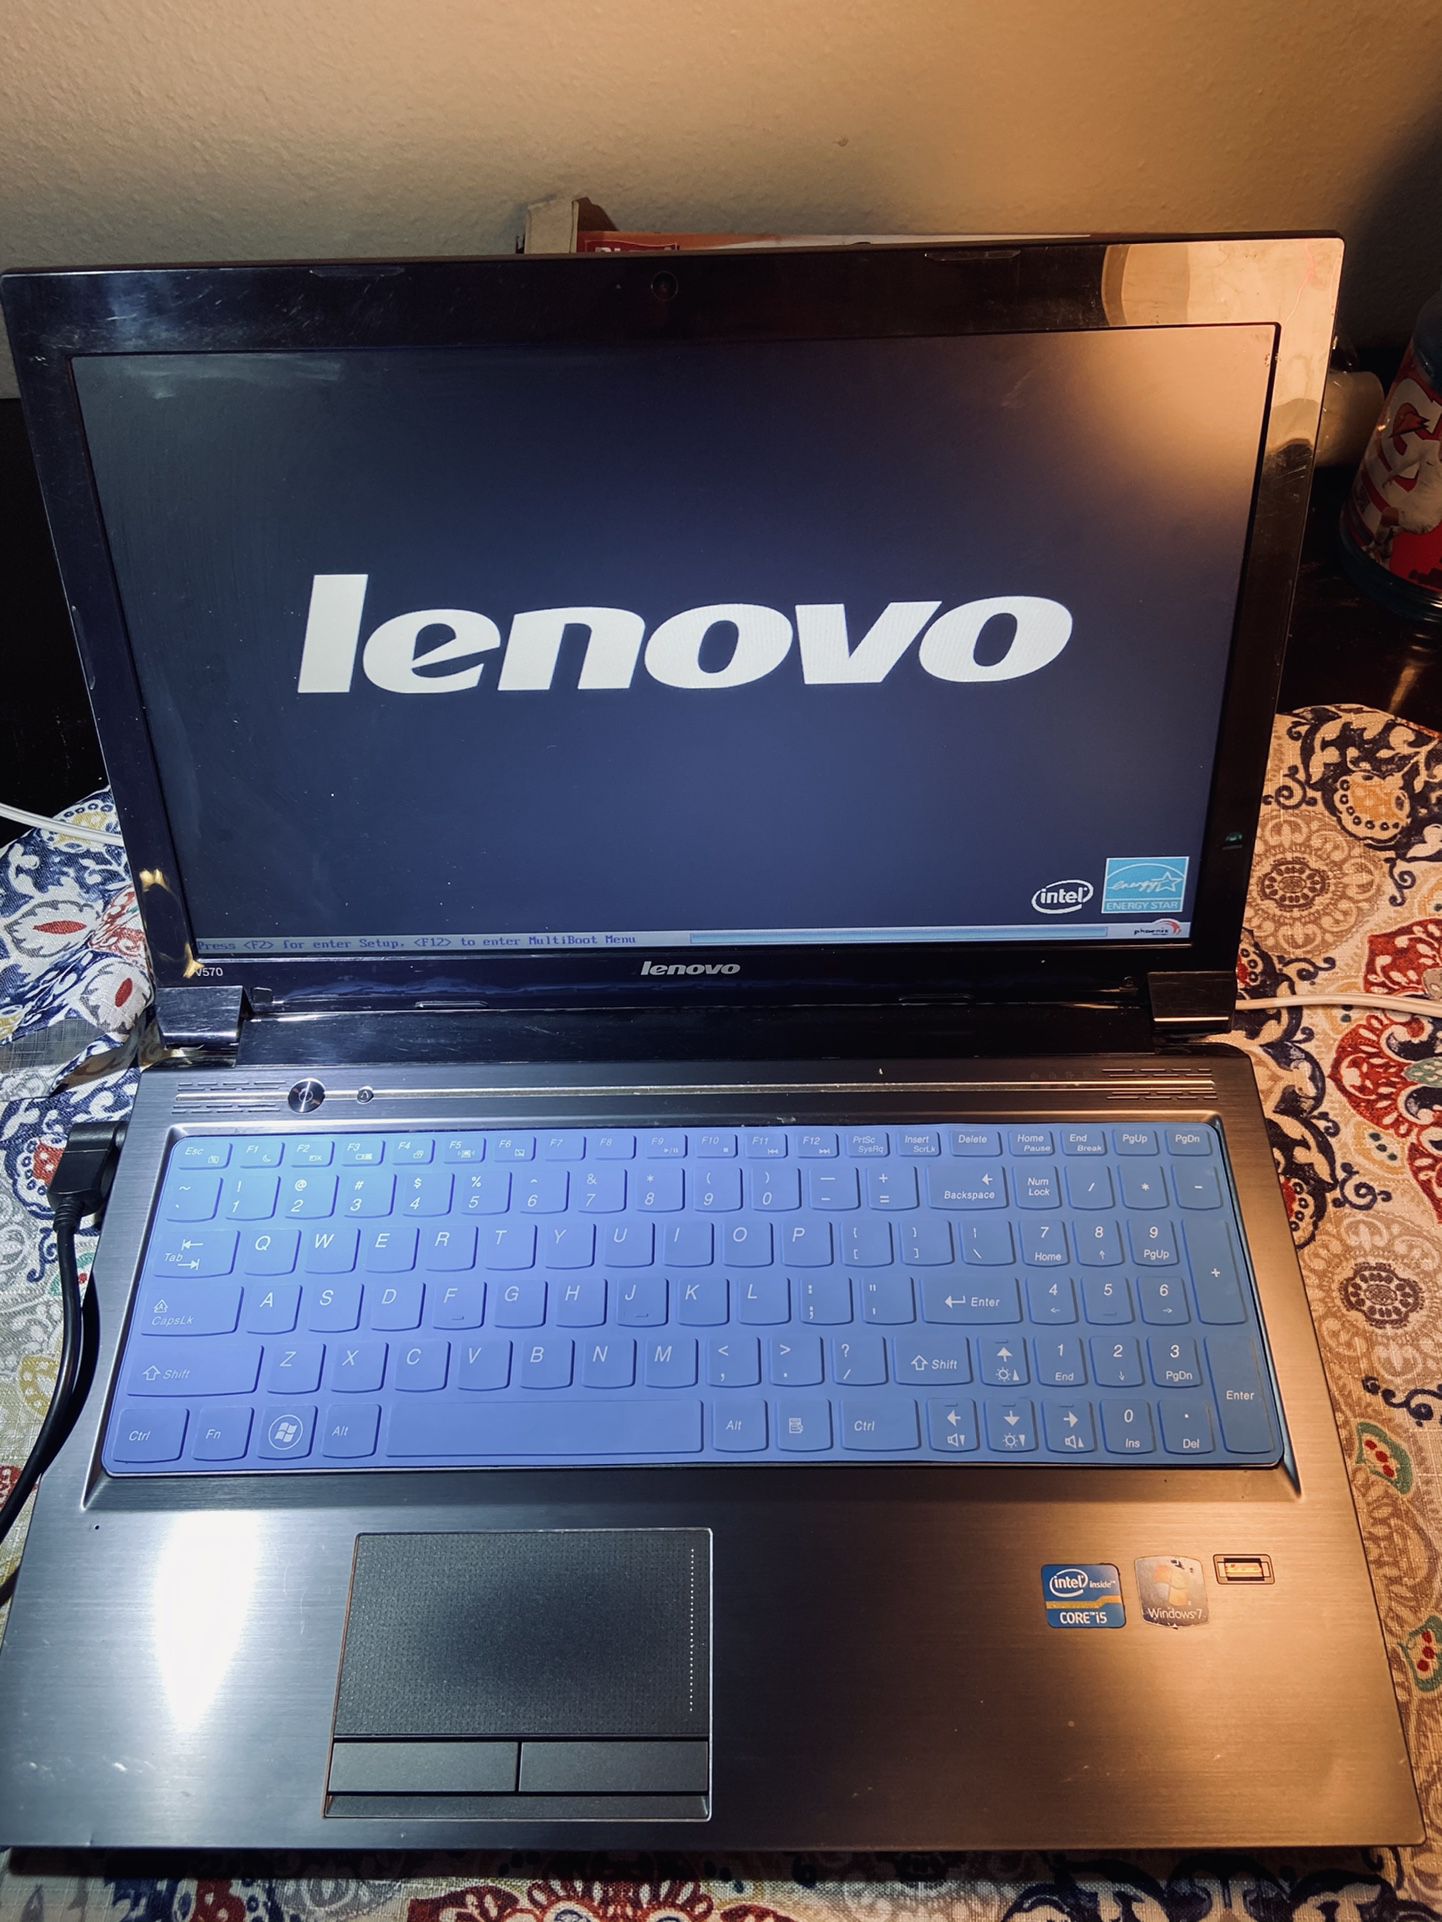 Laptop Lenovo 15inches,V570,500gb HD, 6GB ram,Office 365, 245$ or best offer